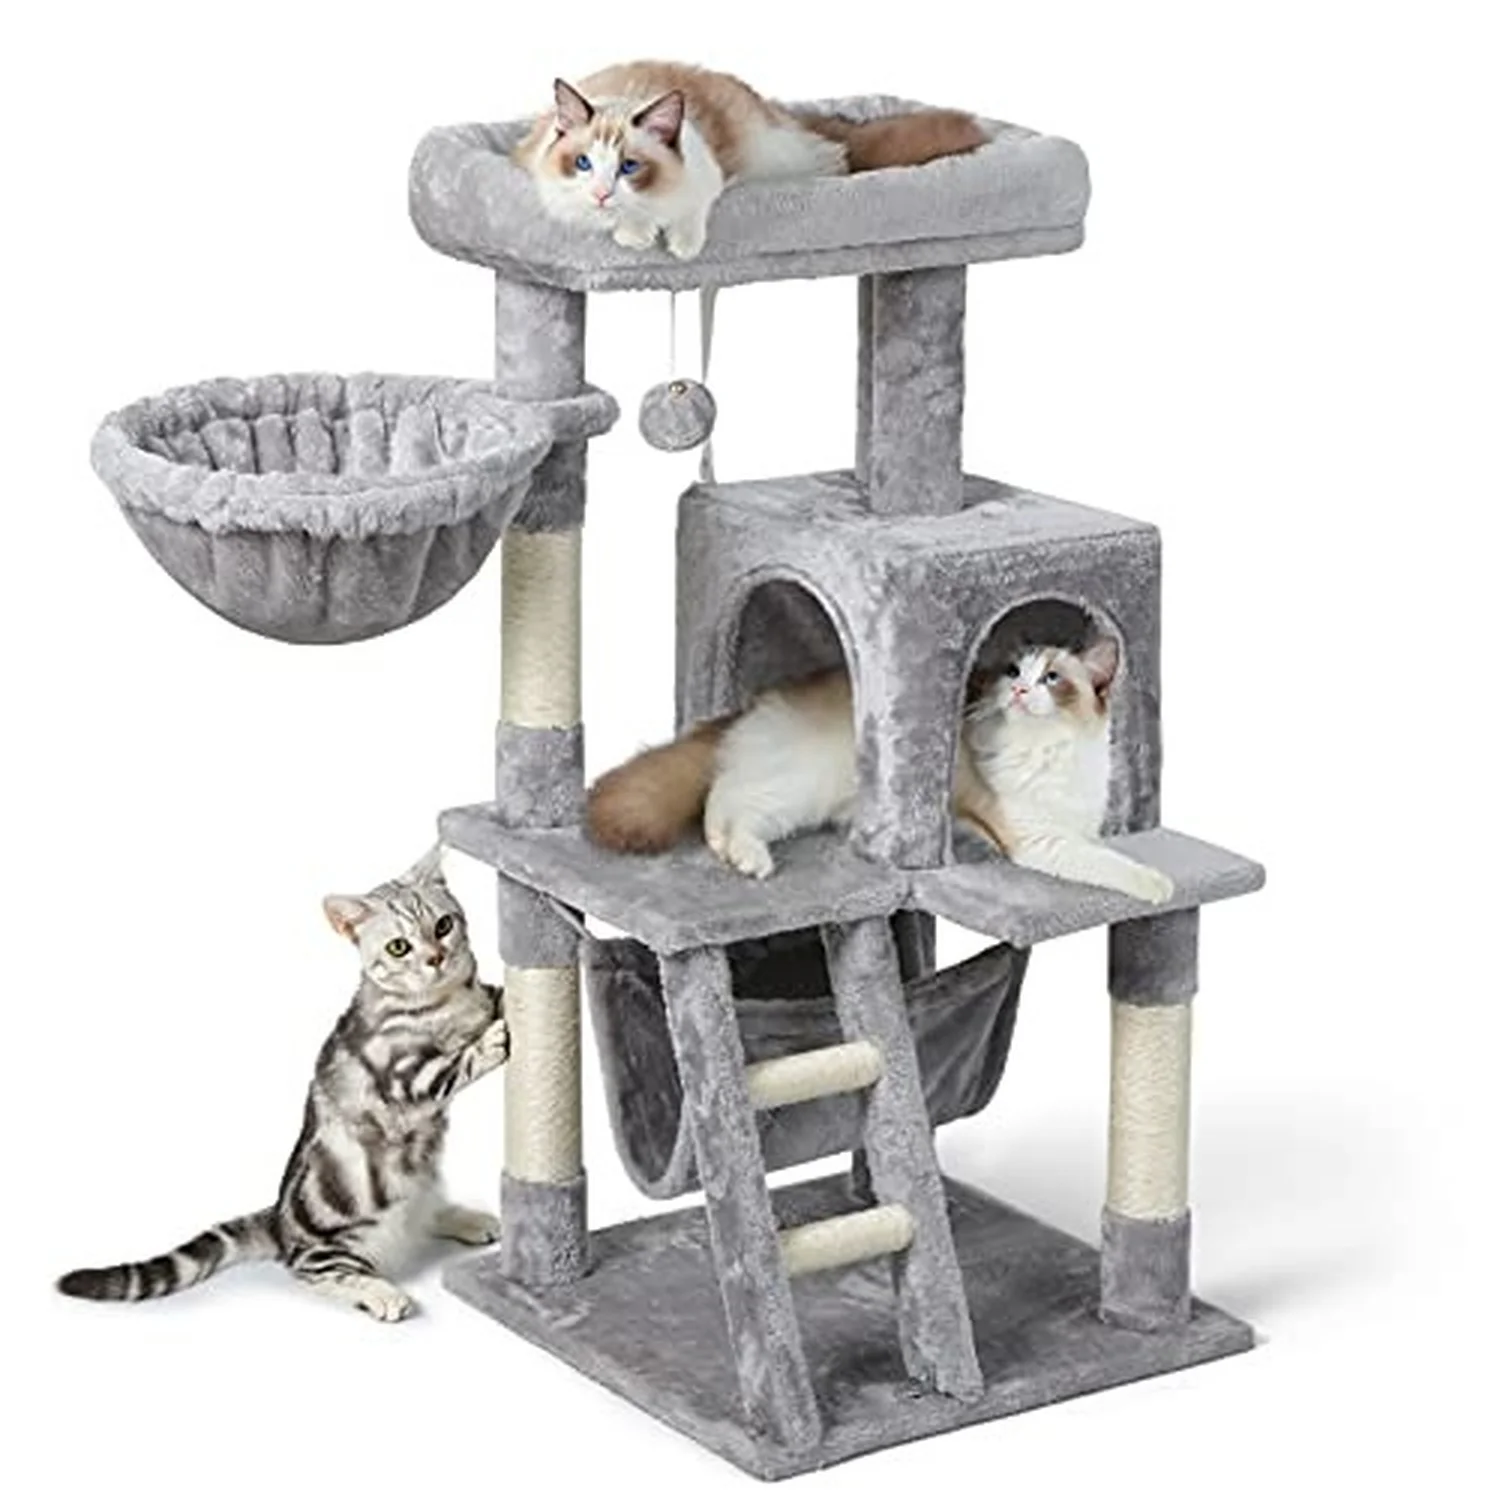 

39" Tall Cat Tree Cat Tower Multi-Level Cat House Condo with Large Perch, Scratching Posts Hammock, Cat Climbing Stand with Toy